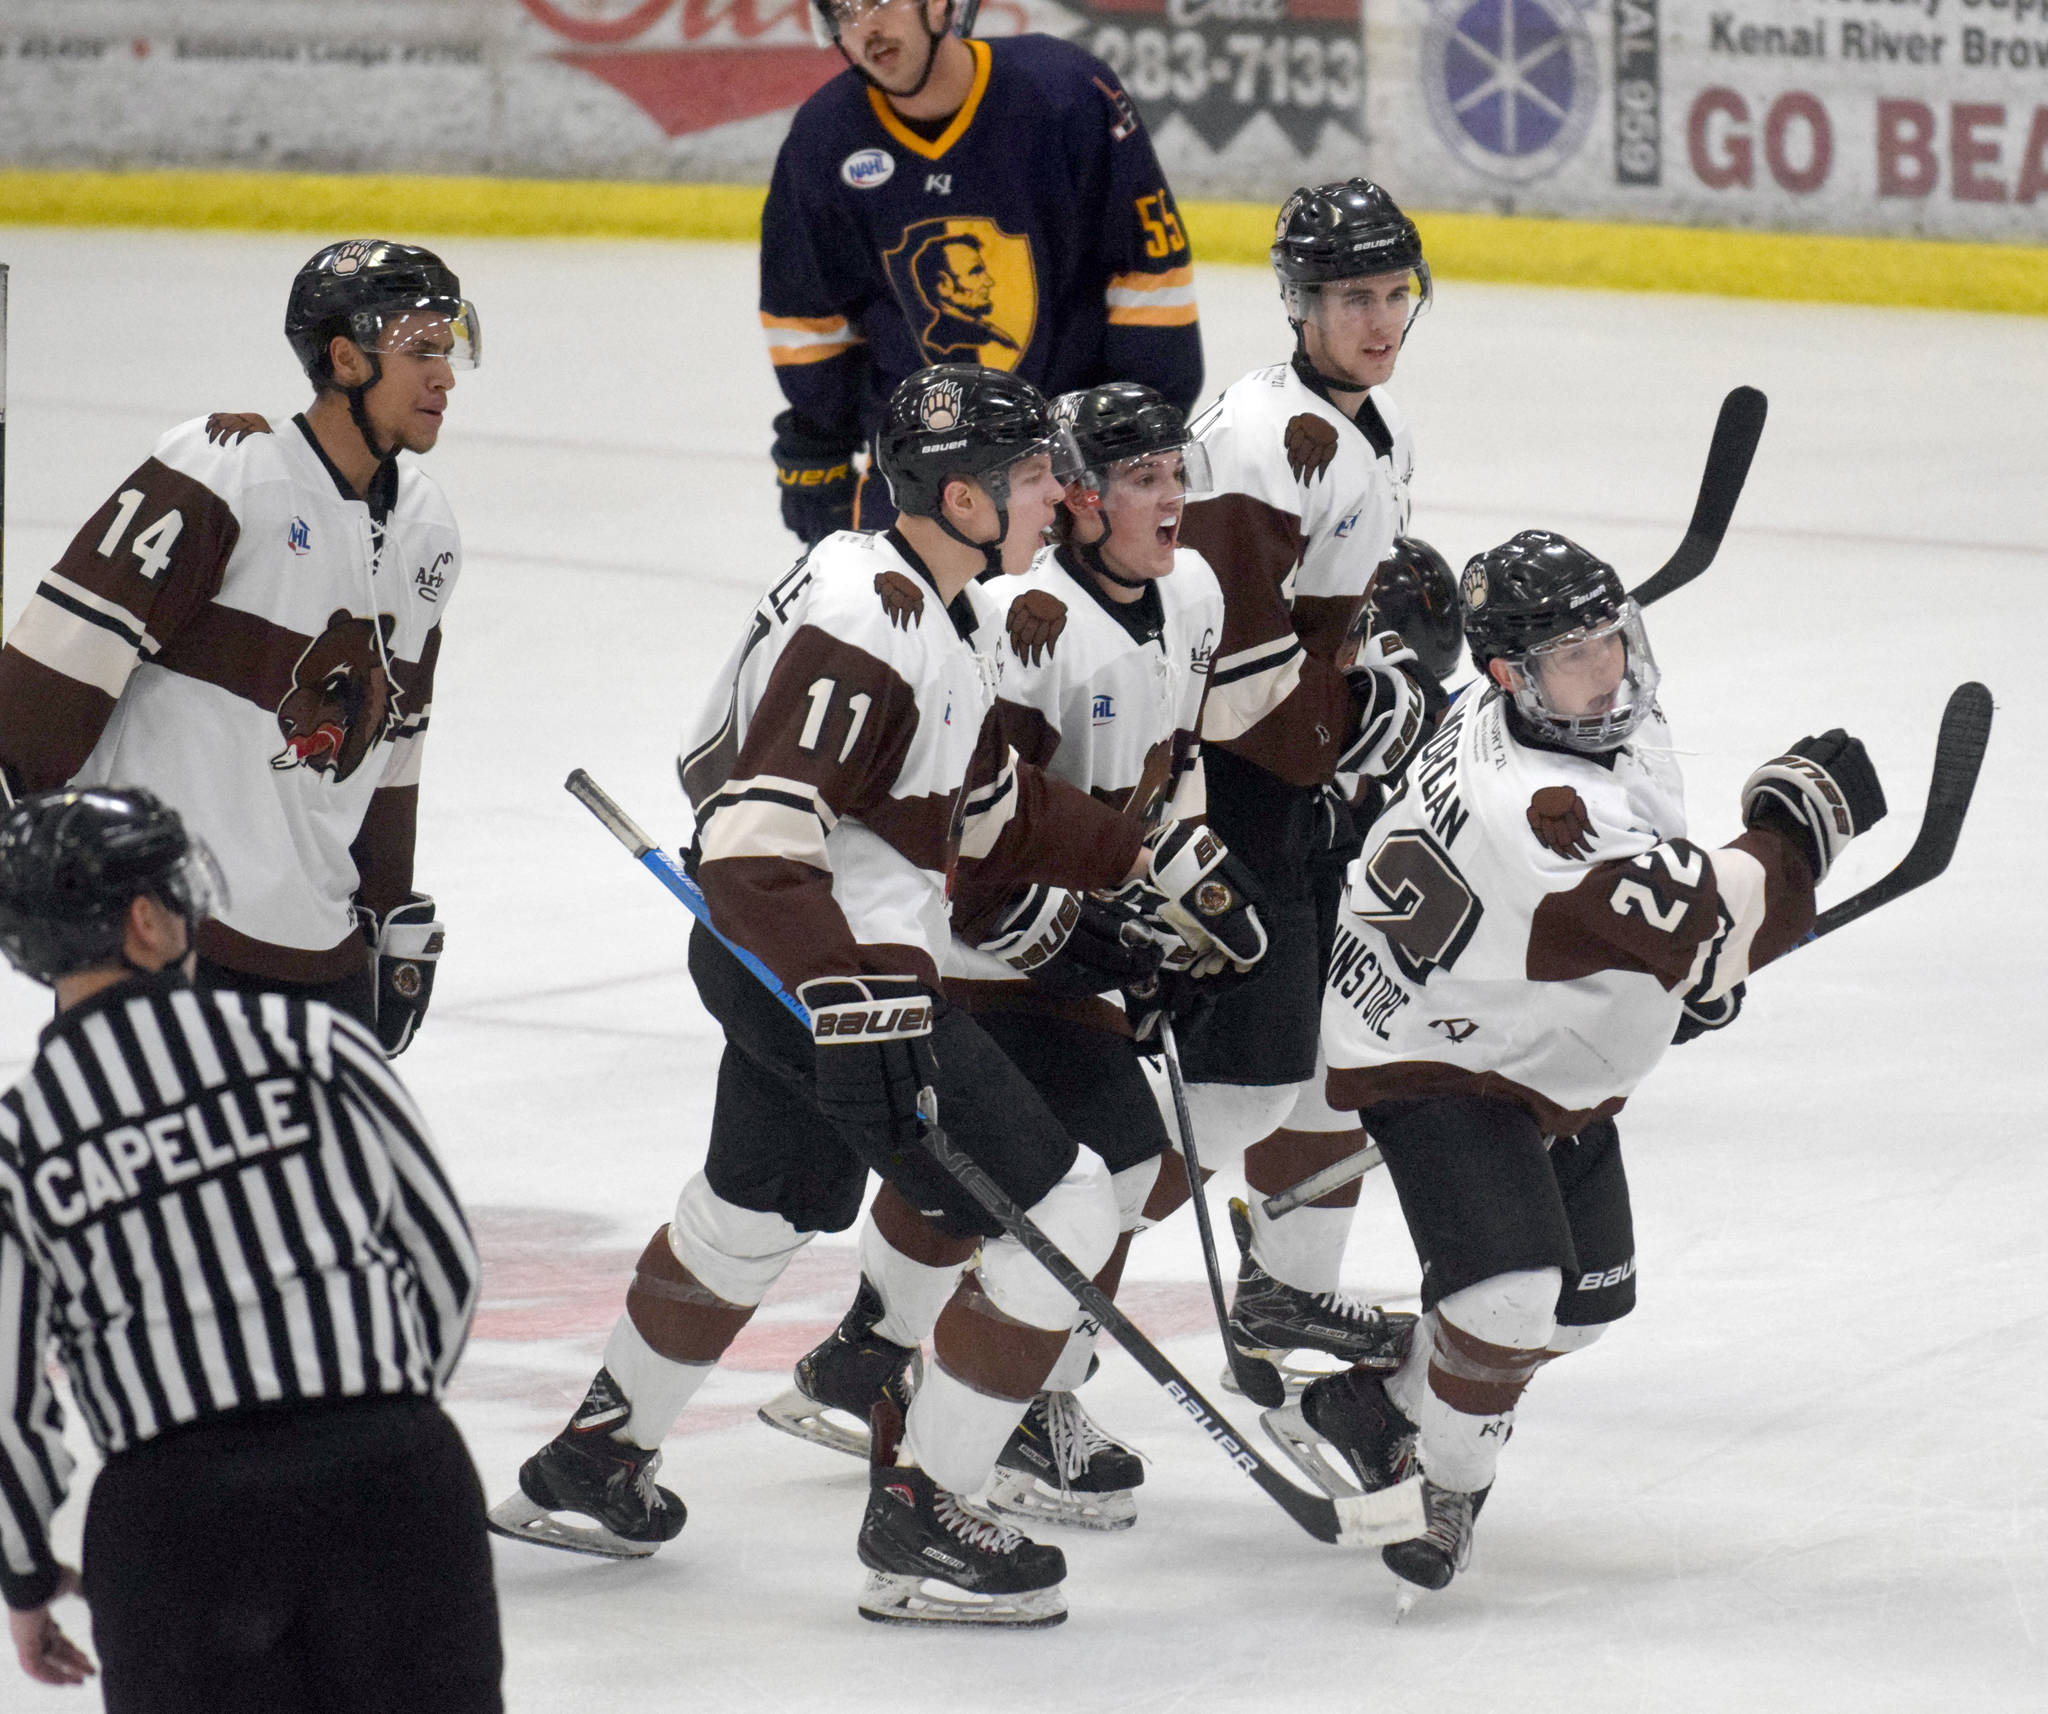 Peter Morgan of the Kenai River Brown Bears celebrates his goal with teammates Ryan Reid, Porter Schachle, Cody Moline and Dylan Hadfield on Friday, Nov. 15, 2019, against the Springfield (Illinois) Jr. Blues at the Soldotna Regional Sports Complex in Soldotna, Alaska. (Photo by Jeff Helminiak/Peninsula Clarion)